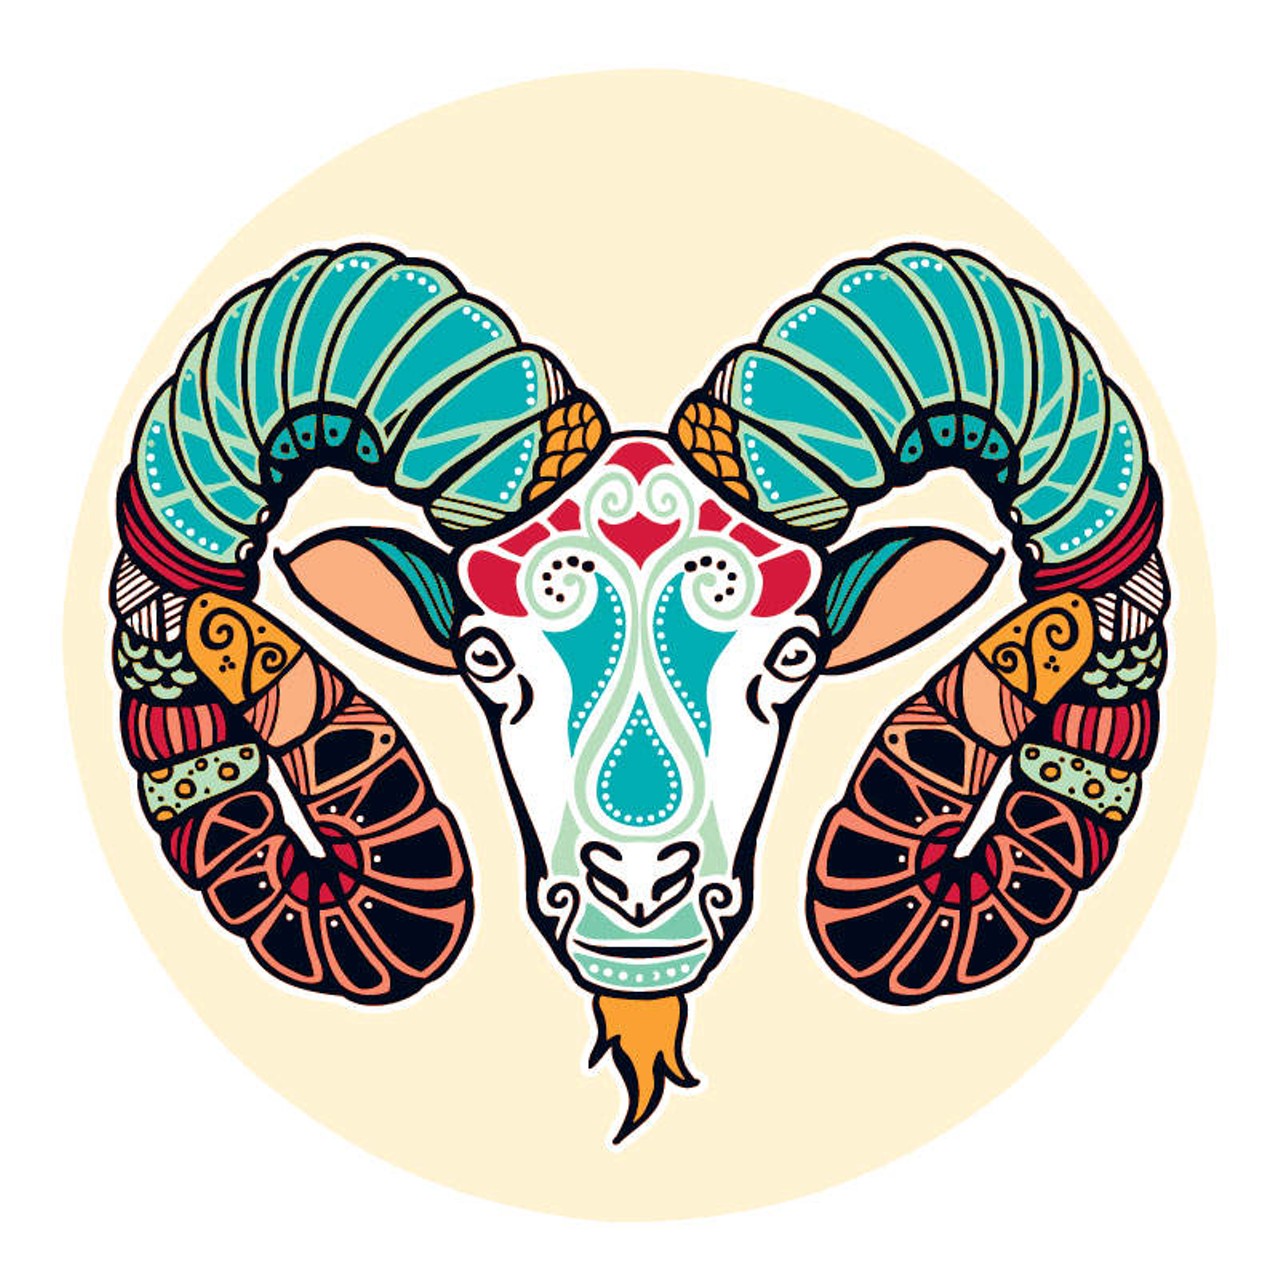 ARIES (March 21-April 20): As the next round of experience sharpens your sense of how to handle this, it becomes important to remain vigilant. The fact that you can focus better than anyone in the zodiac is working in your favor. Nothing is 100 percent certain. If anything's hanging you up, it's an overpowering need to know for sure that you've got it all nailed down. Pardon me, but this is never the case. The reward of patience is patience. At the moment your life is less about managing the external piece than it is about tending the fire that keeps it all going and makes you so good at what you do.